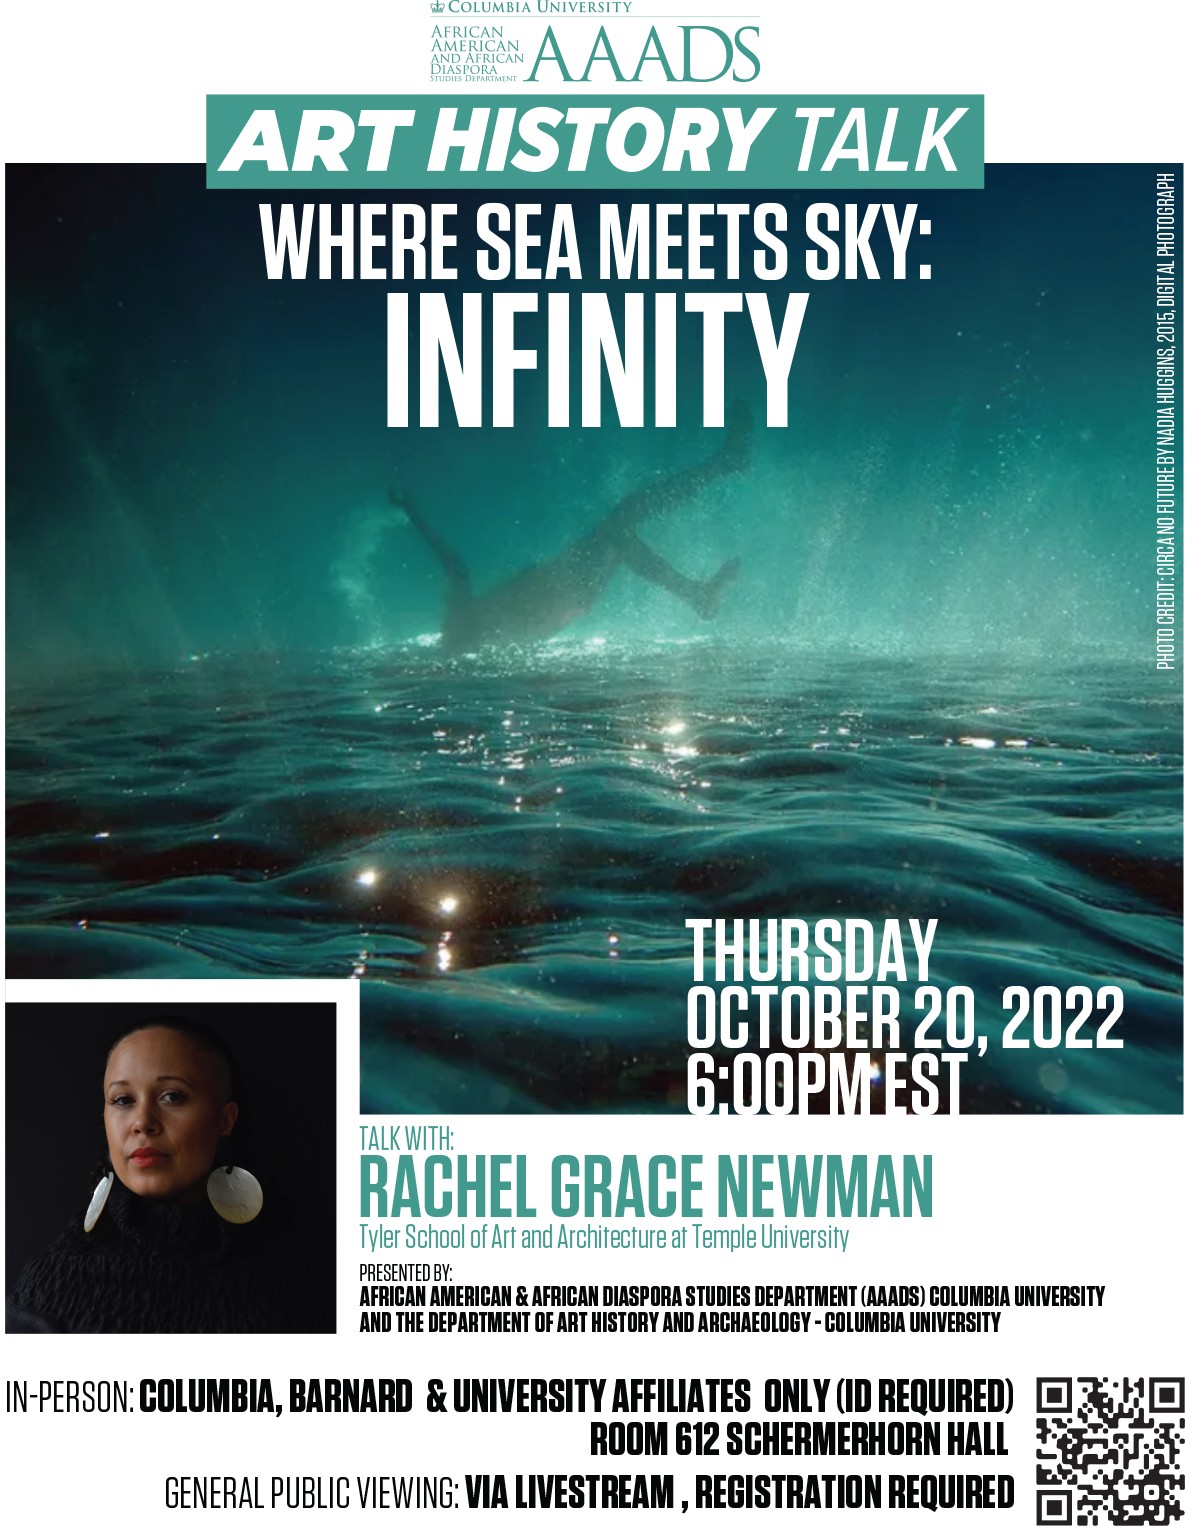 Image of event poster Where Sea Meets Sky: Infinity